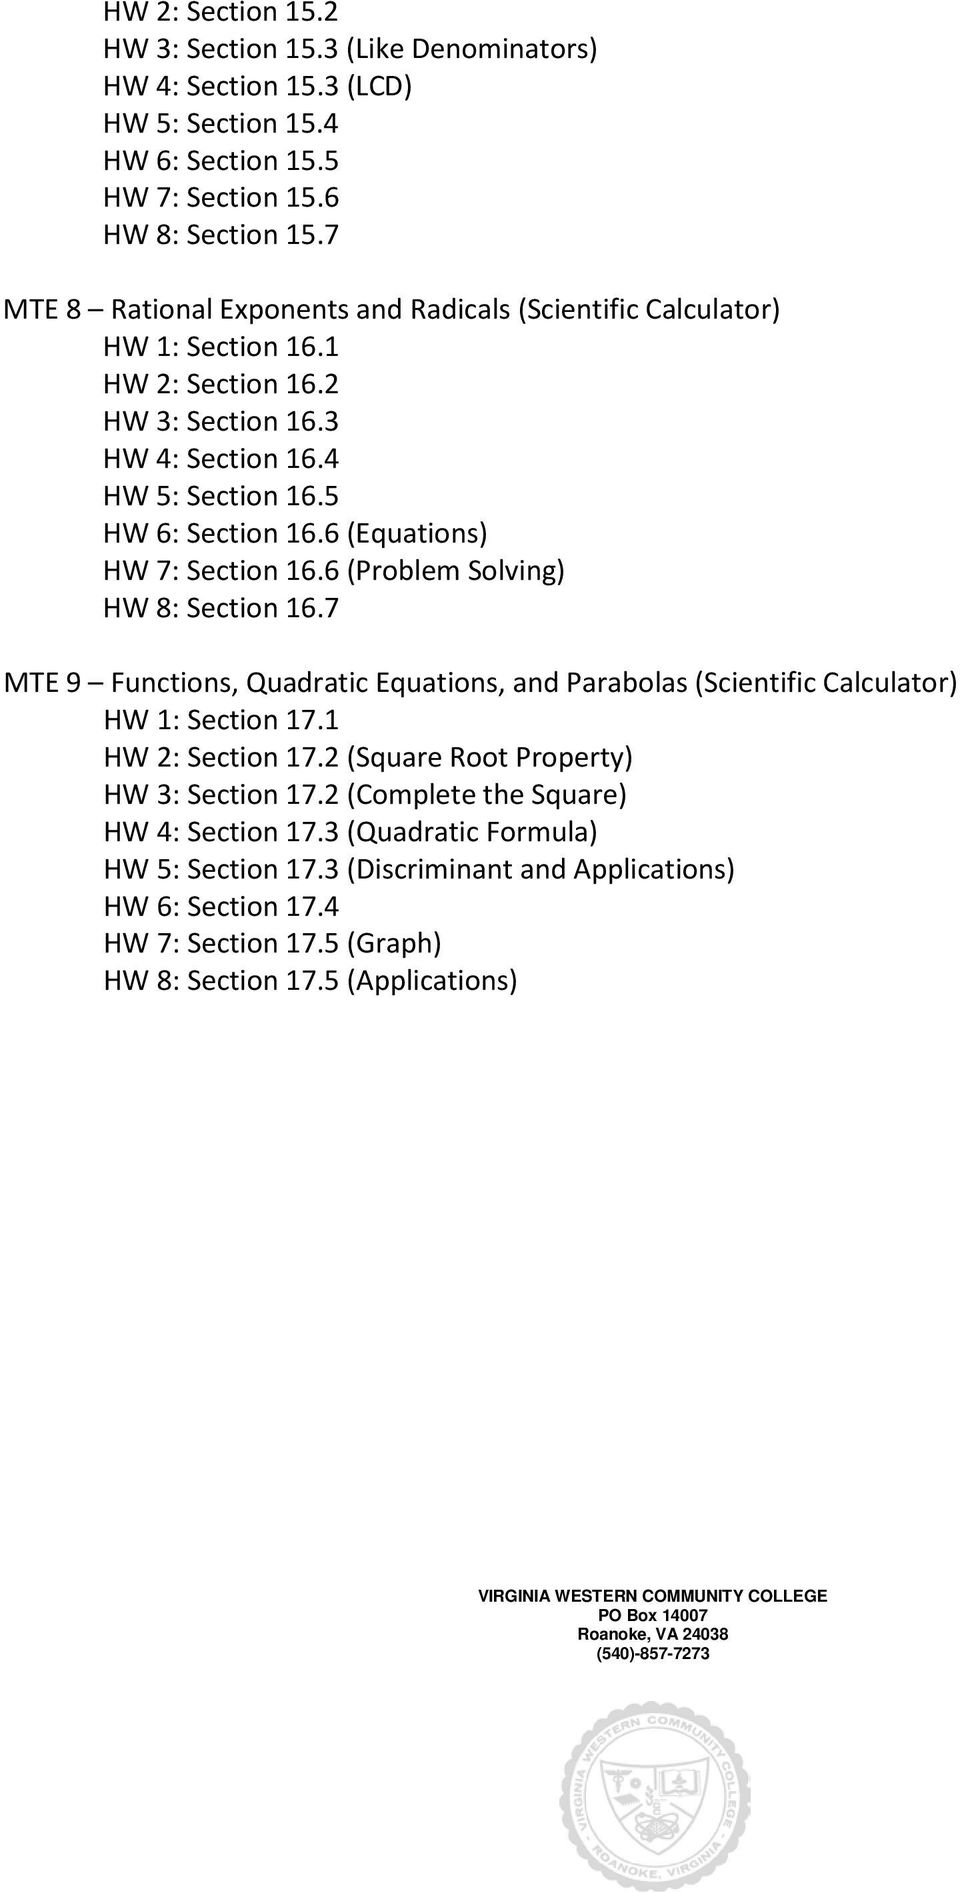 6 (Equations) HW 7: Section 16.6 (Problem Solving) HW 8: Section 16.7 Functions, Quadratic Equations, and Parabolas (Scientific Calculator) HW 1: Section 17.1 HW 2: Section 17.